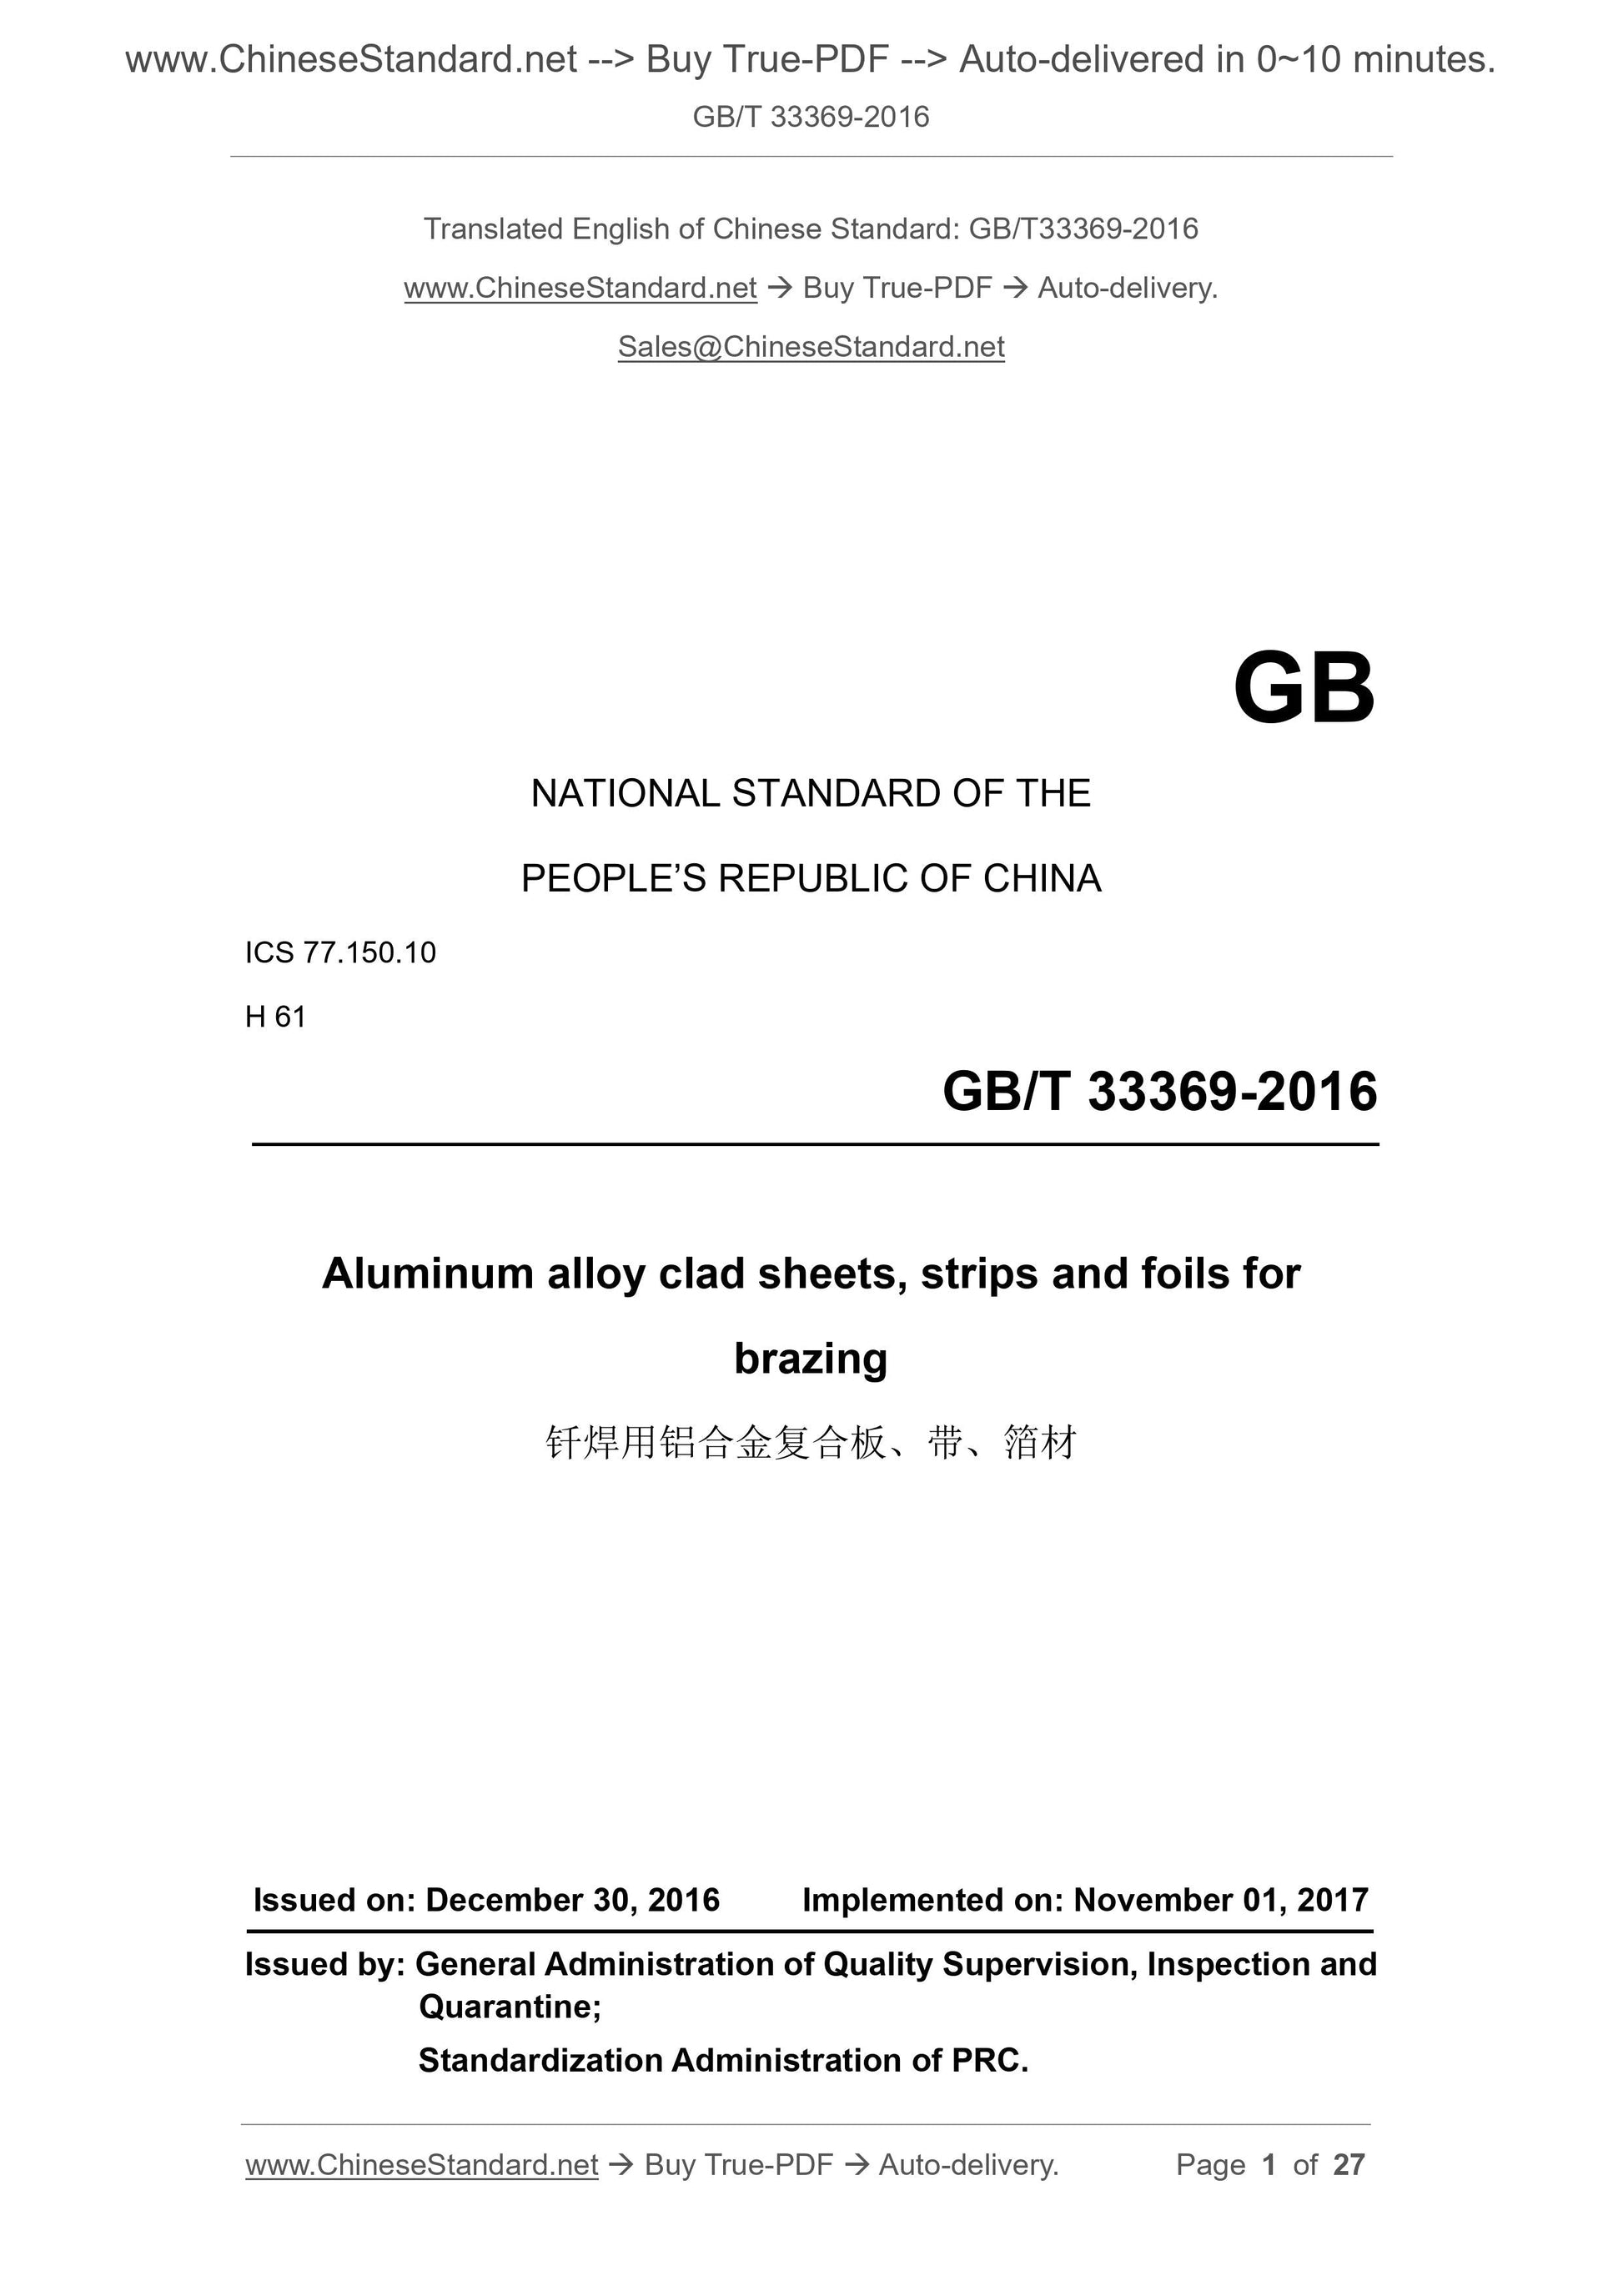 GB/T 33369-2016 Page 1